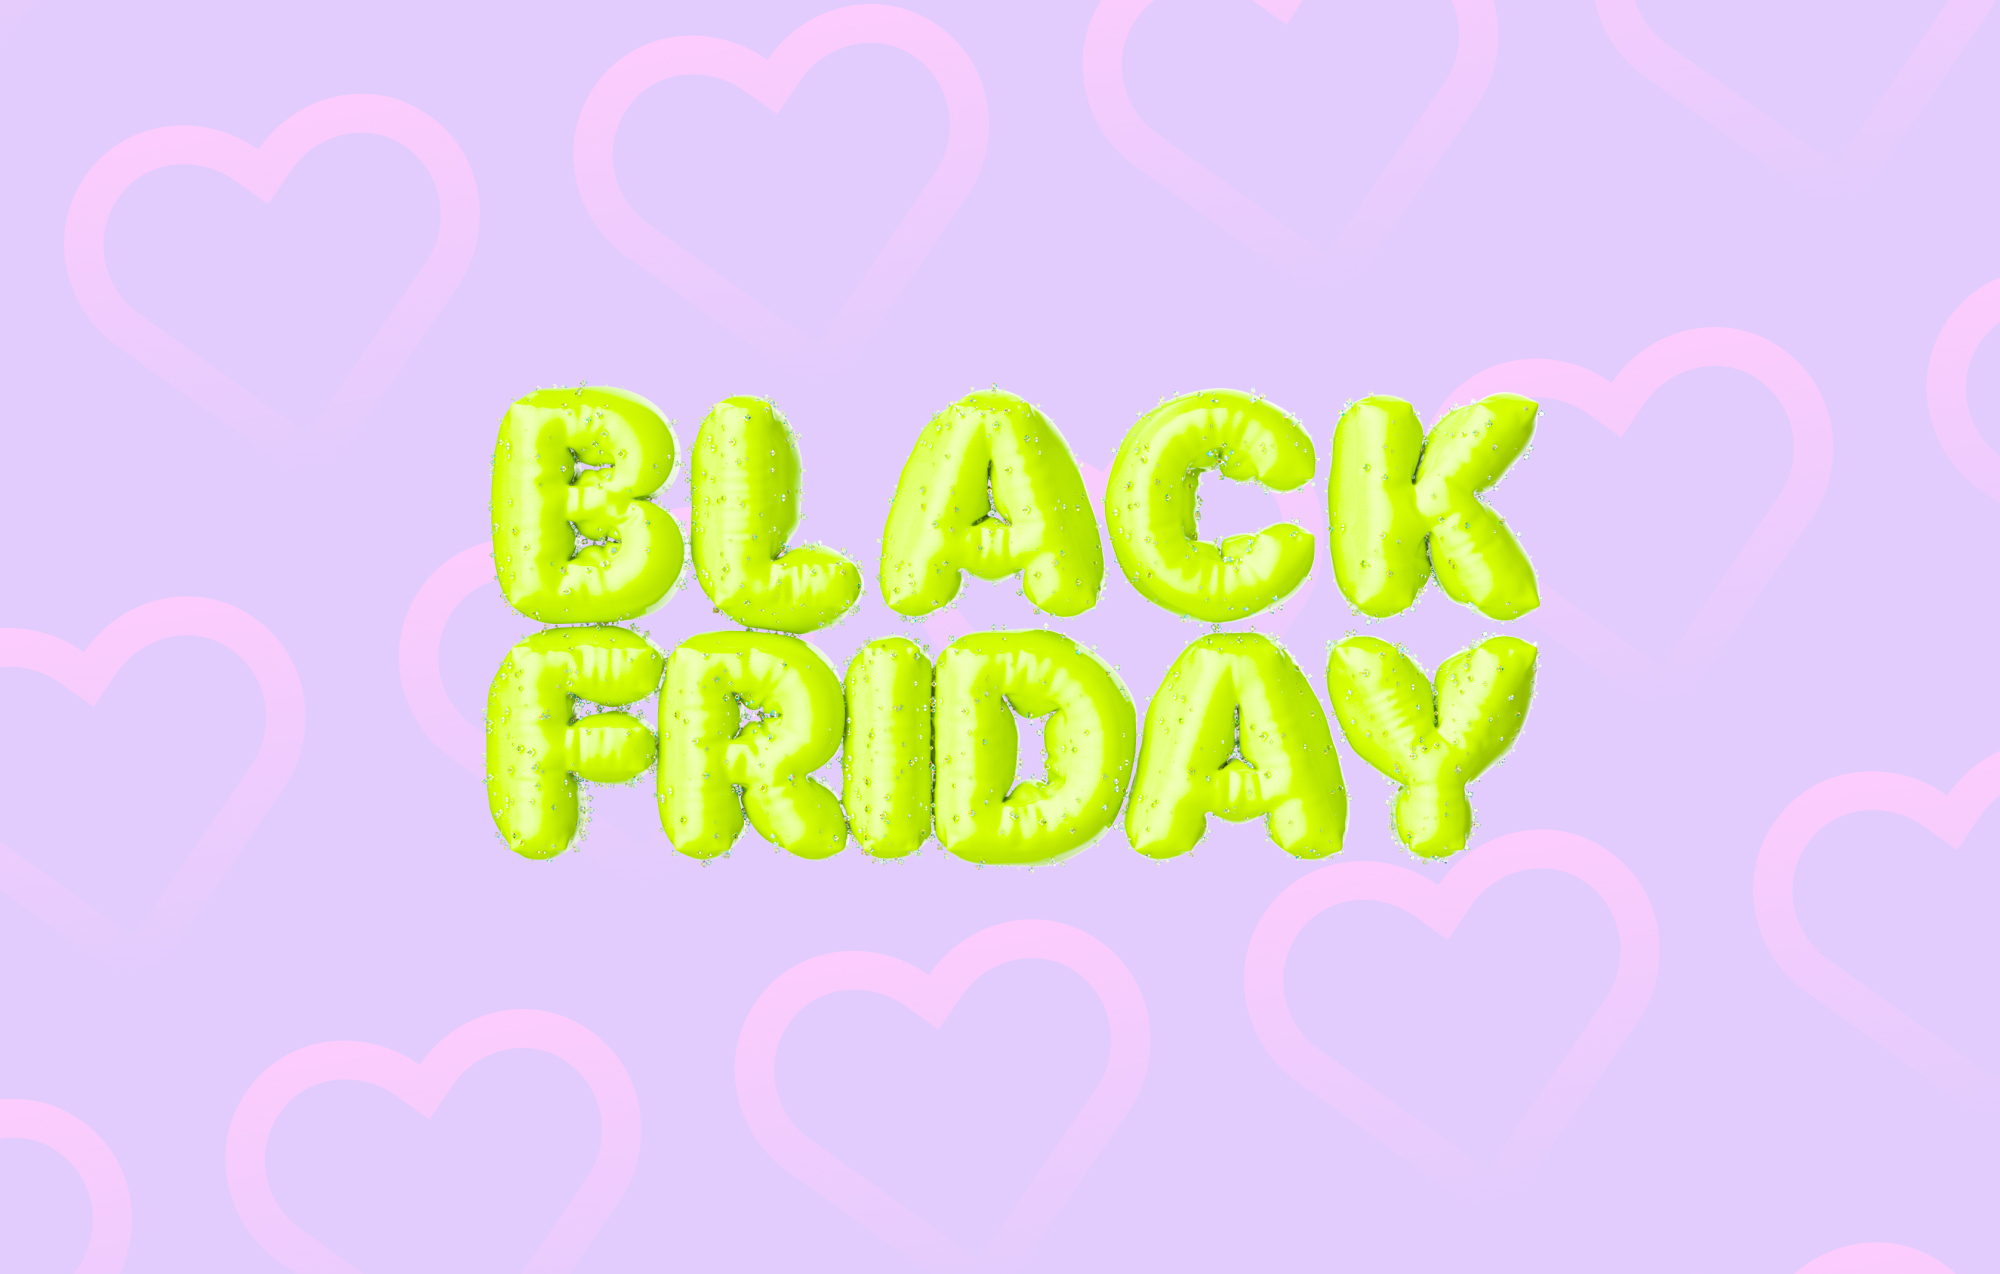 Black Friday in WhatsApp, image of blown up Black Friday letters in light green on a pink background with hearts, for blog post by charles, WhatsApp marketing software